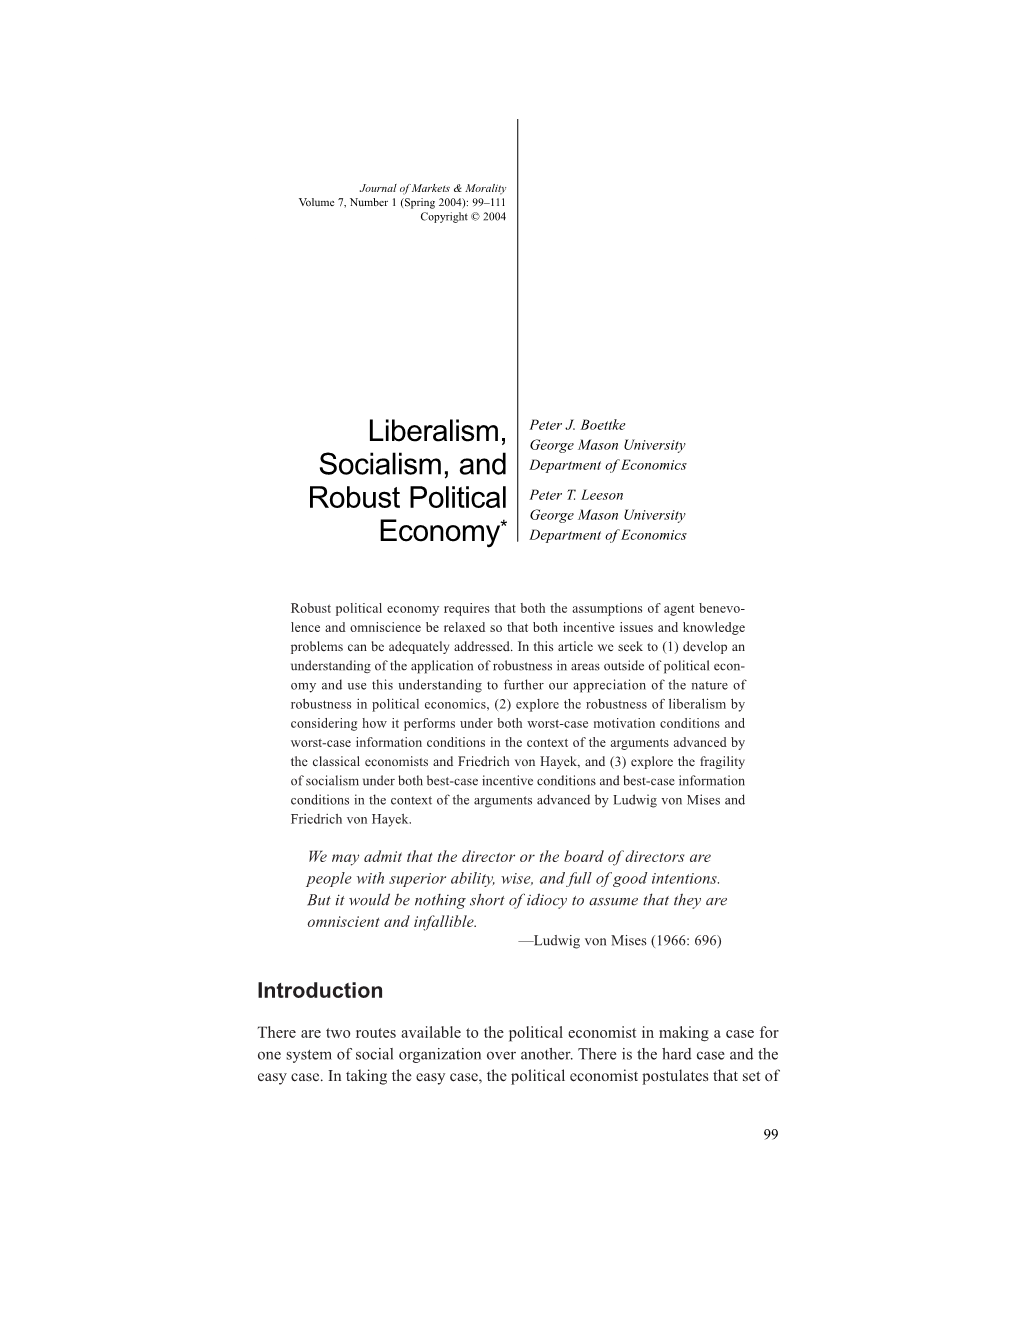 Liberalism, Socialism, and Robust Political Economy*